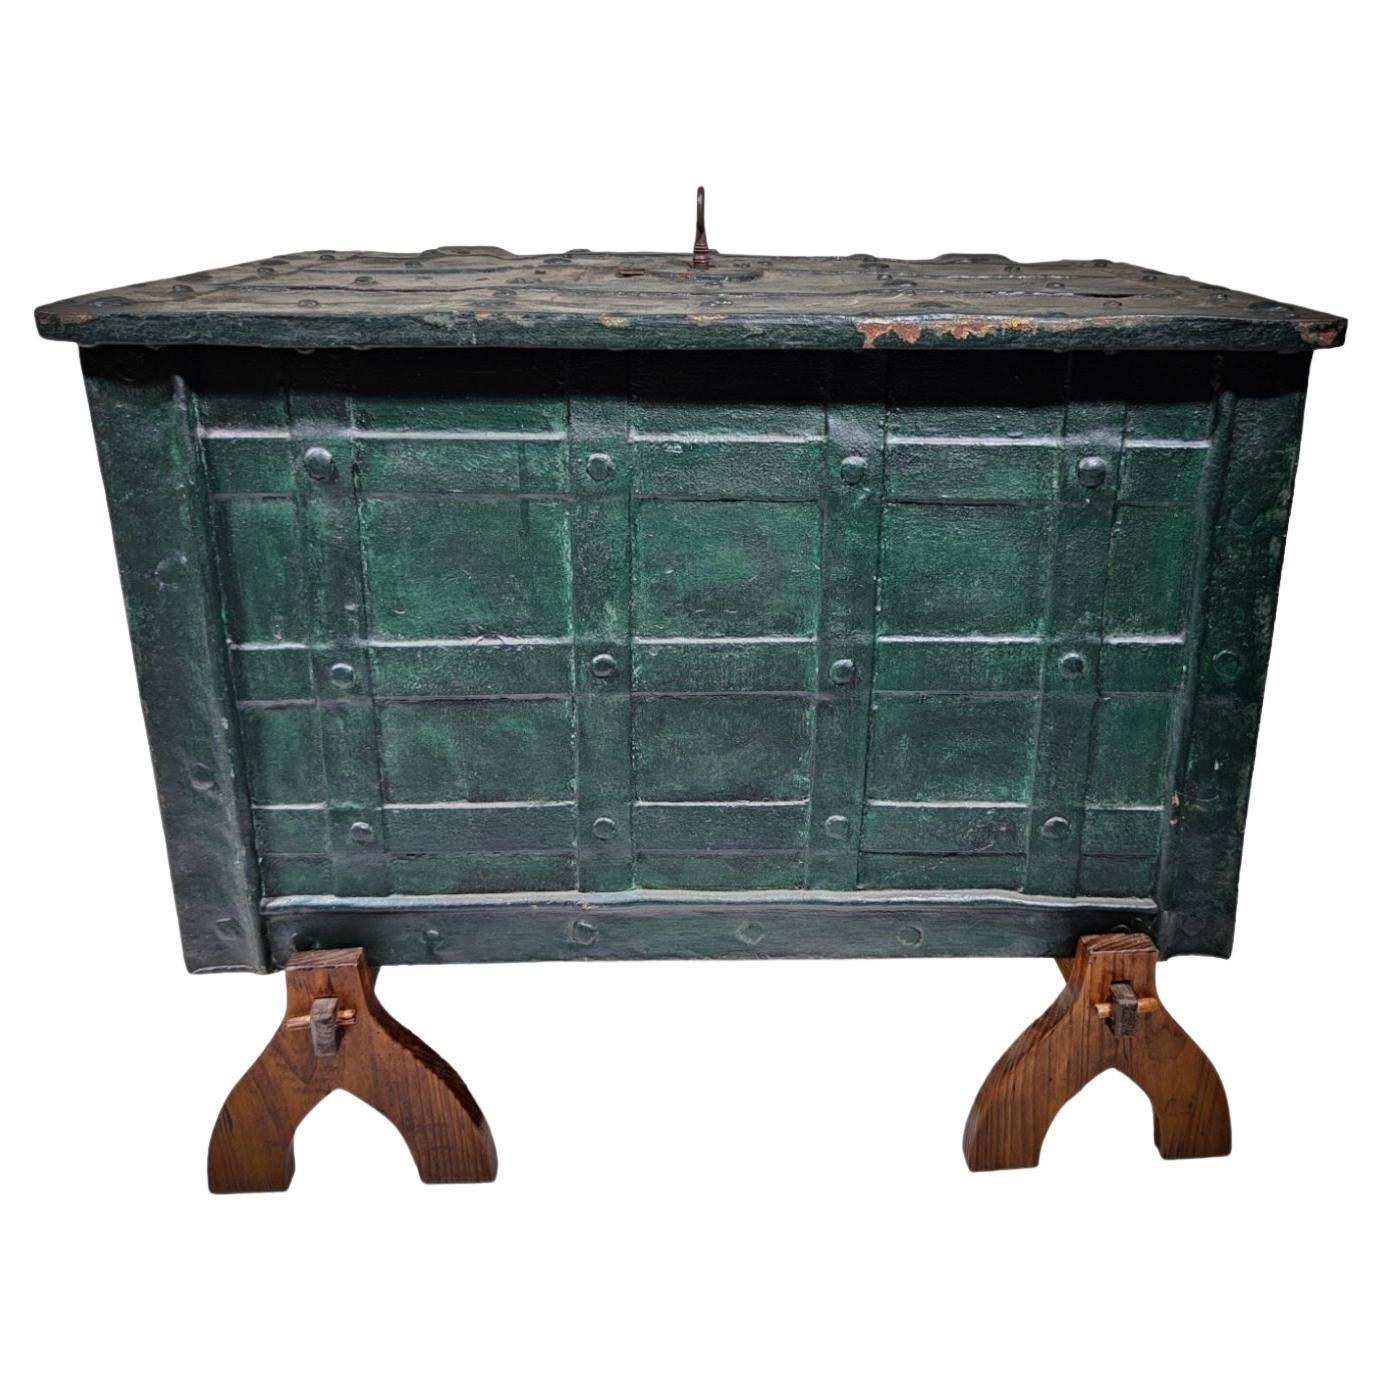 17th Century forged Iron Safe strong box For Sale